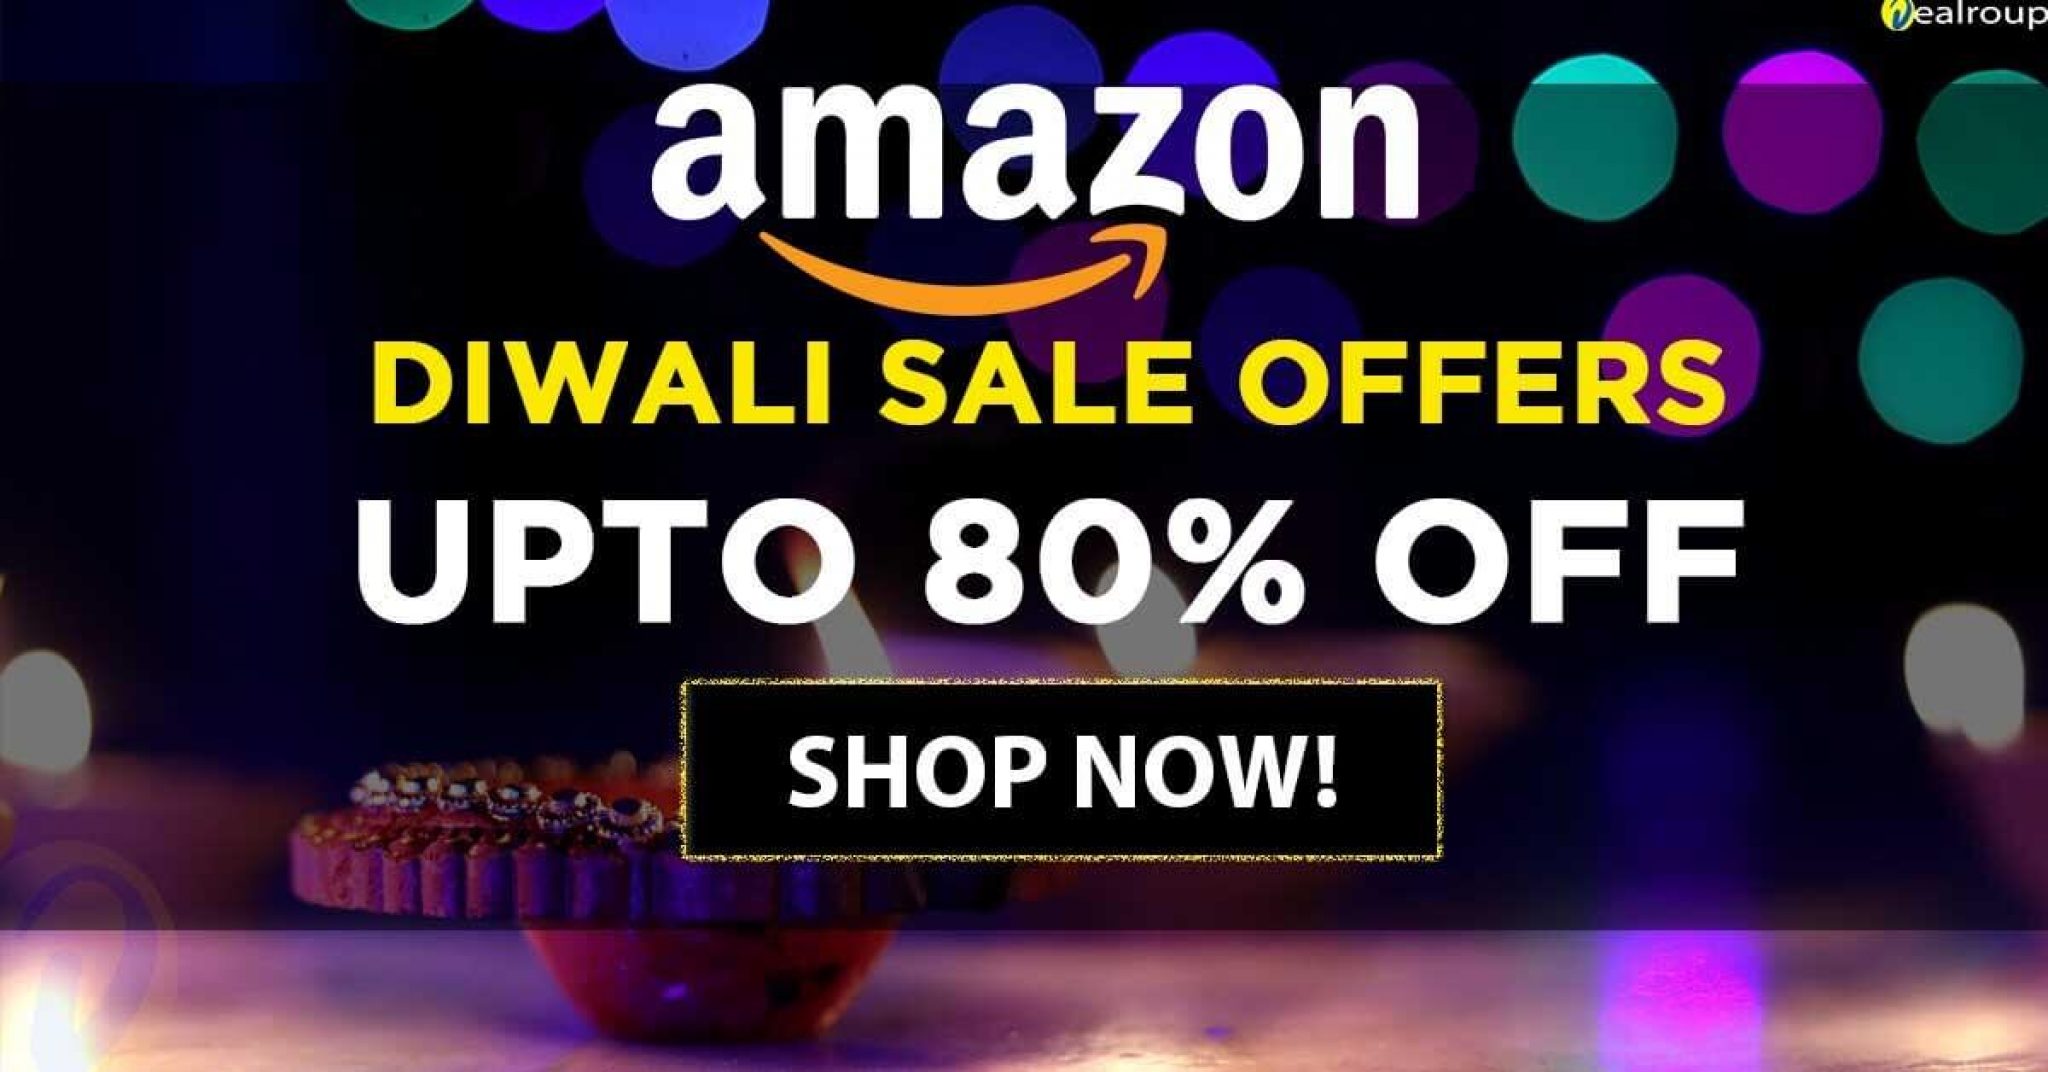 Amazon Diwali Offers & Sales 2020 Deals & Coupons → UPTO 80 OFF